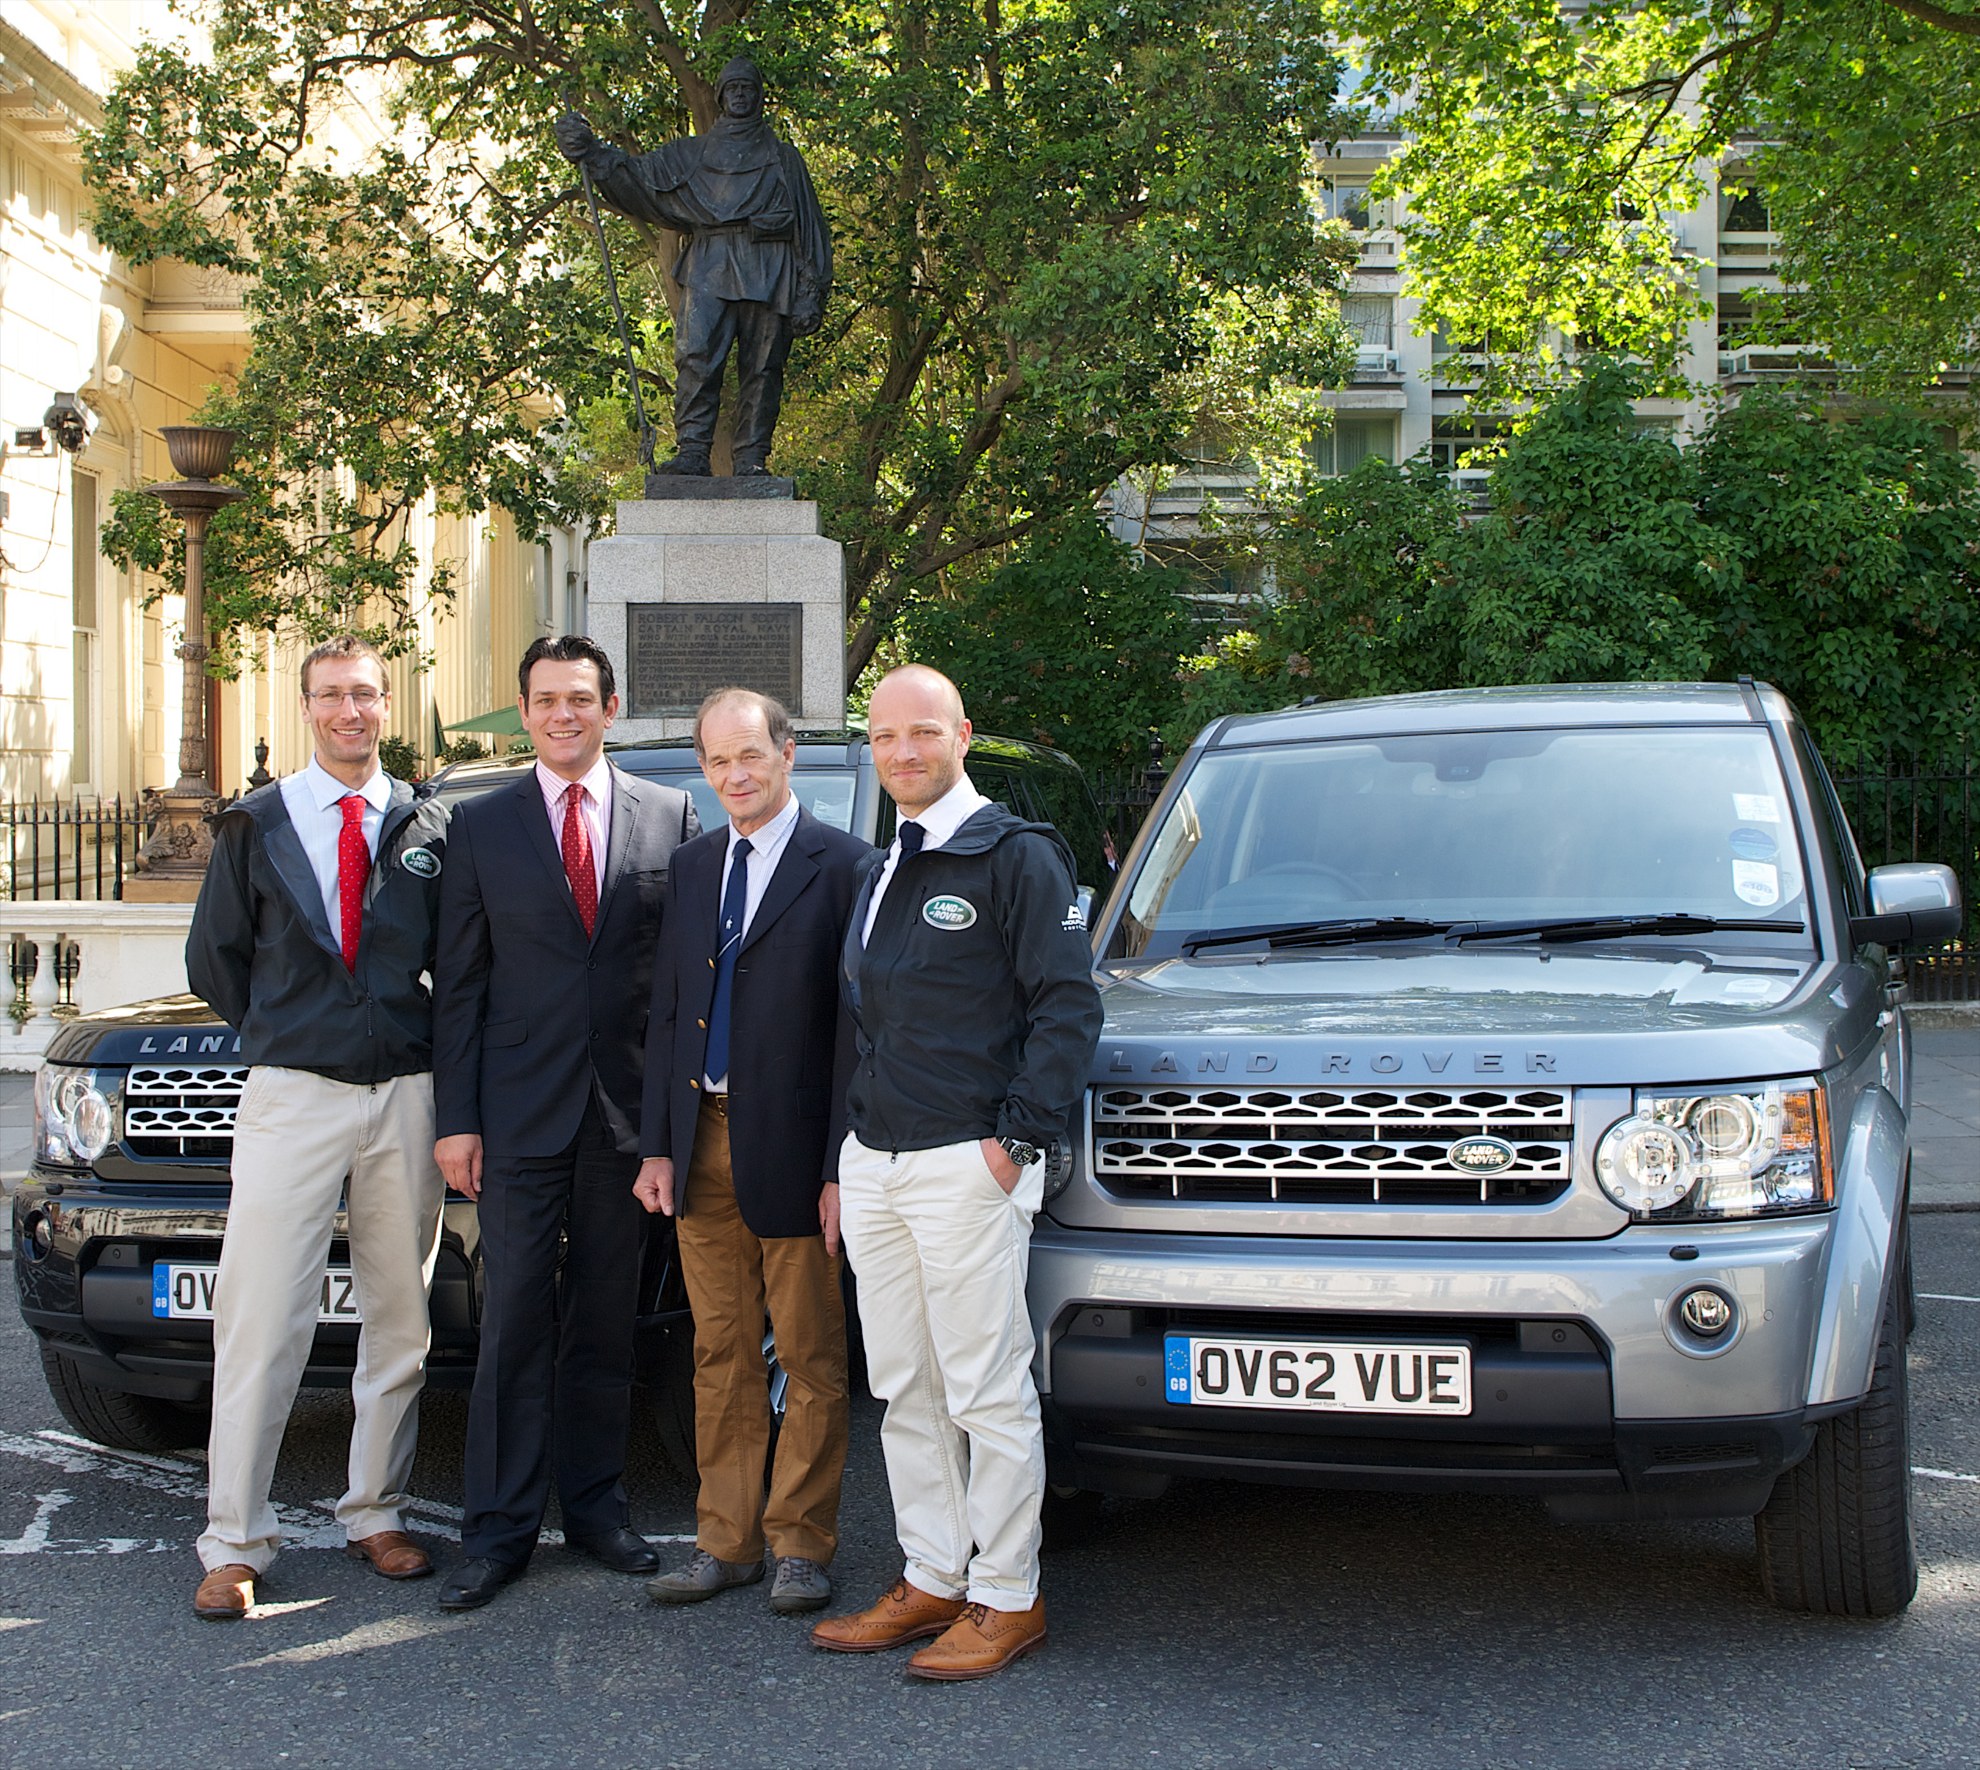 LAND ROVER SUPPORTS BEN SAUNDERS’ BID TO COMPLETE CAPTAIN SCOTT’S HISTORIC ANTARCTIC EXPEDITION